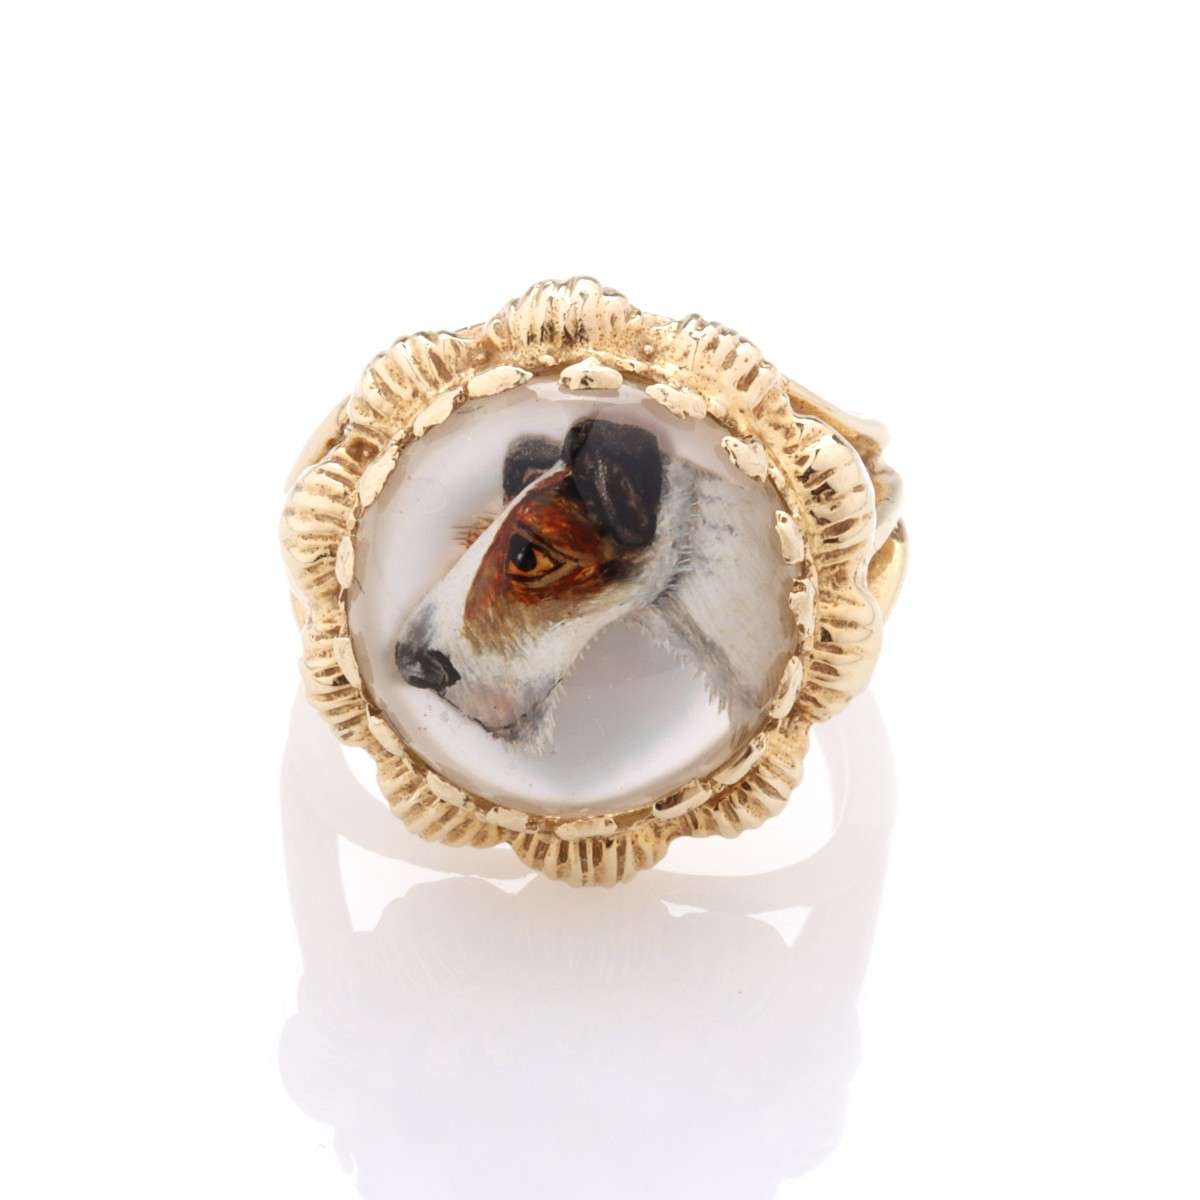 A 14K GOLD RING WITH AIRDALE TERRIER SULPHIDE